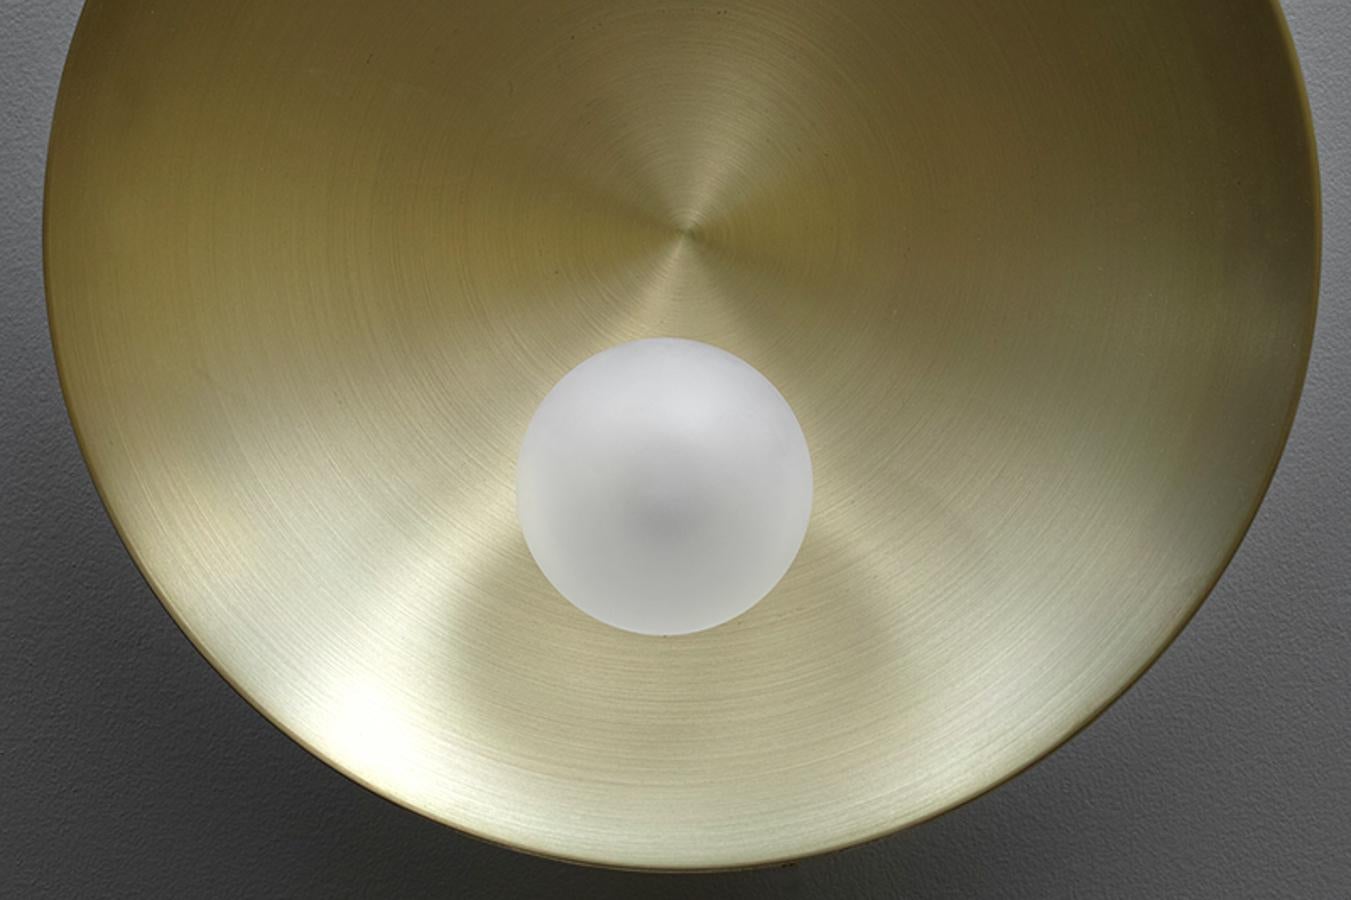 Oyster brass sconce, Carla Baz
Dimensions: 110 x 40 x 18 cm
Materials: Brushed brass 

Oyster is a series of sculptural lighting pieces where the delicately nested pearl in its protective shell embodies itself a poetic and meaningful metaphor.